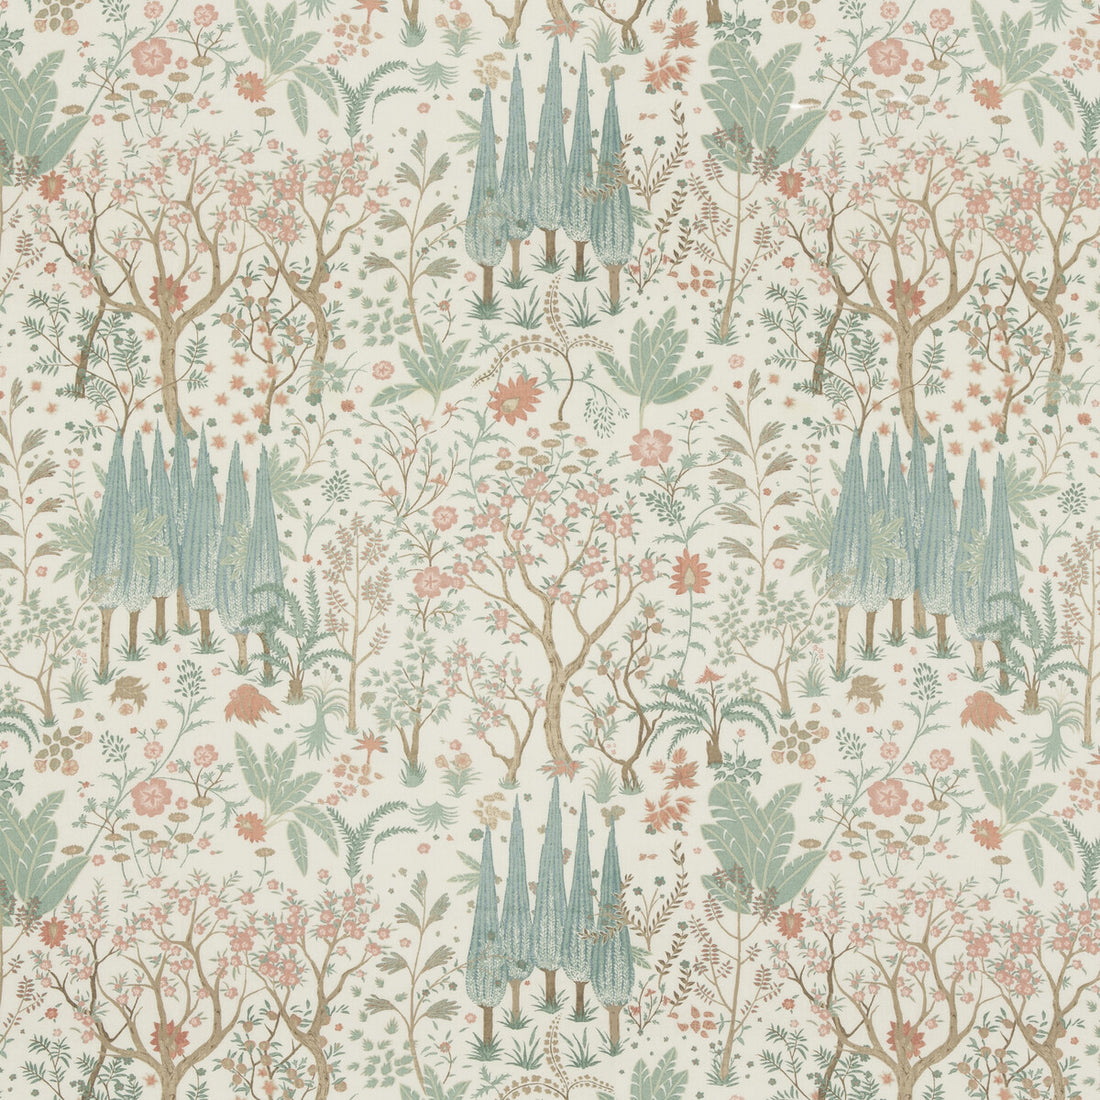 Bridport fabric in aqua color - pattern PP50500.2.0 - by Baker Lifestyle in the Bridport collection